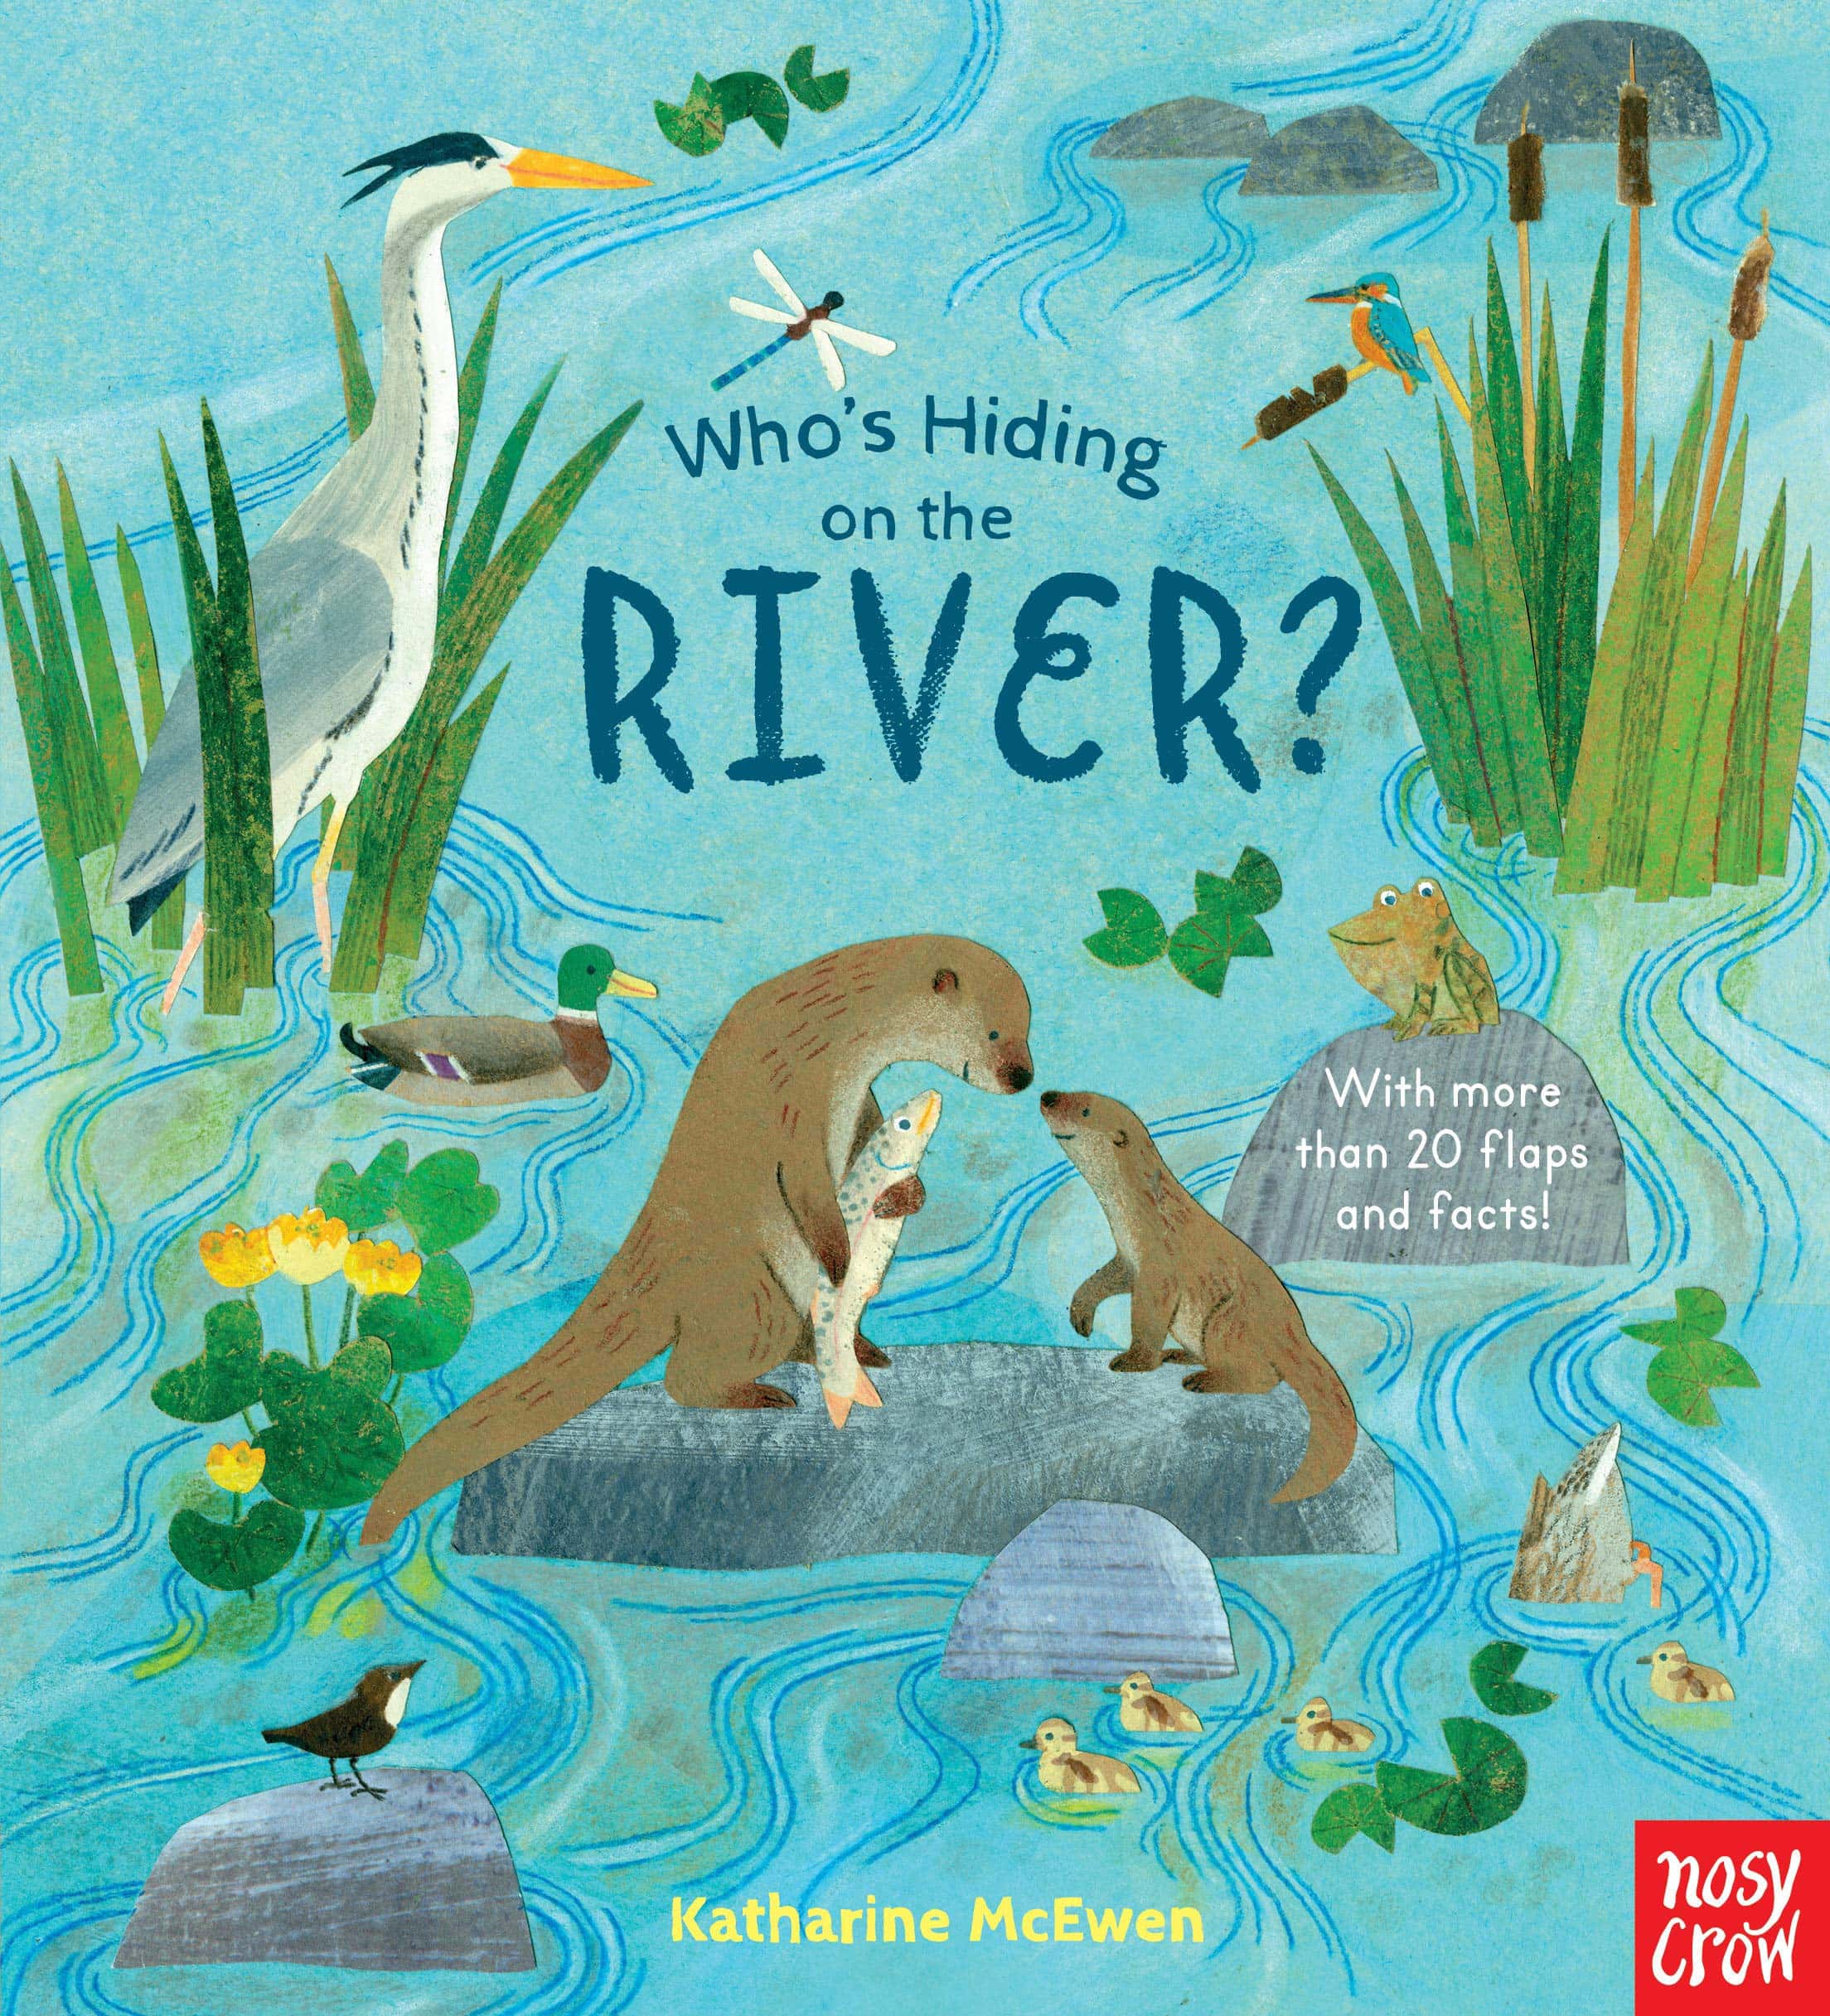 "Who's Hiding on the River?" Book Cover